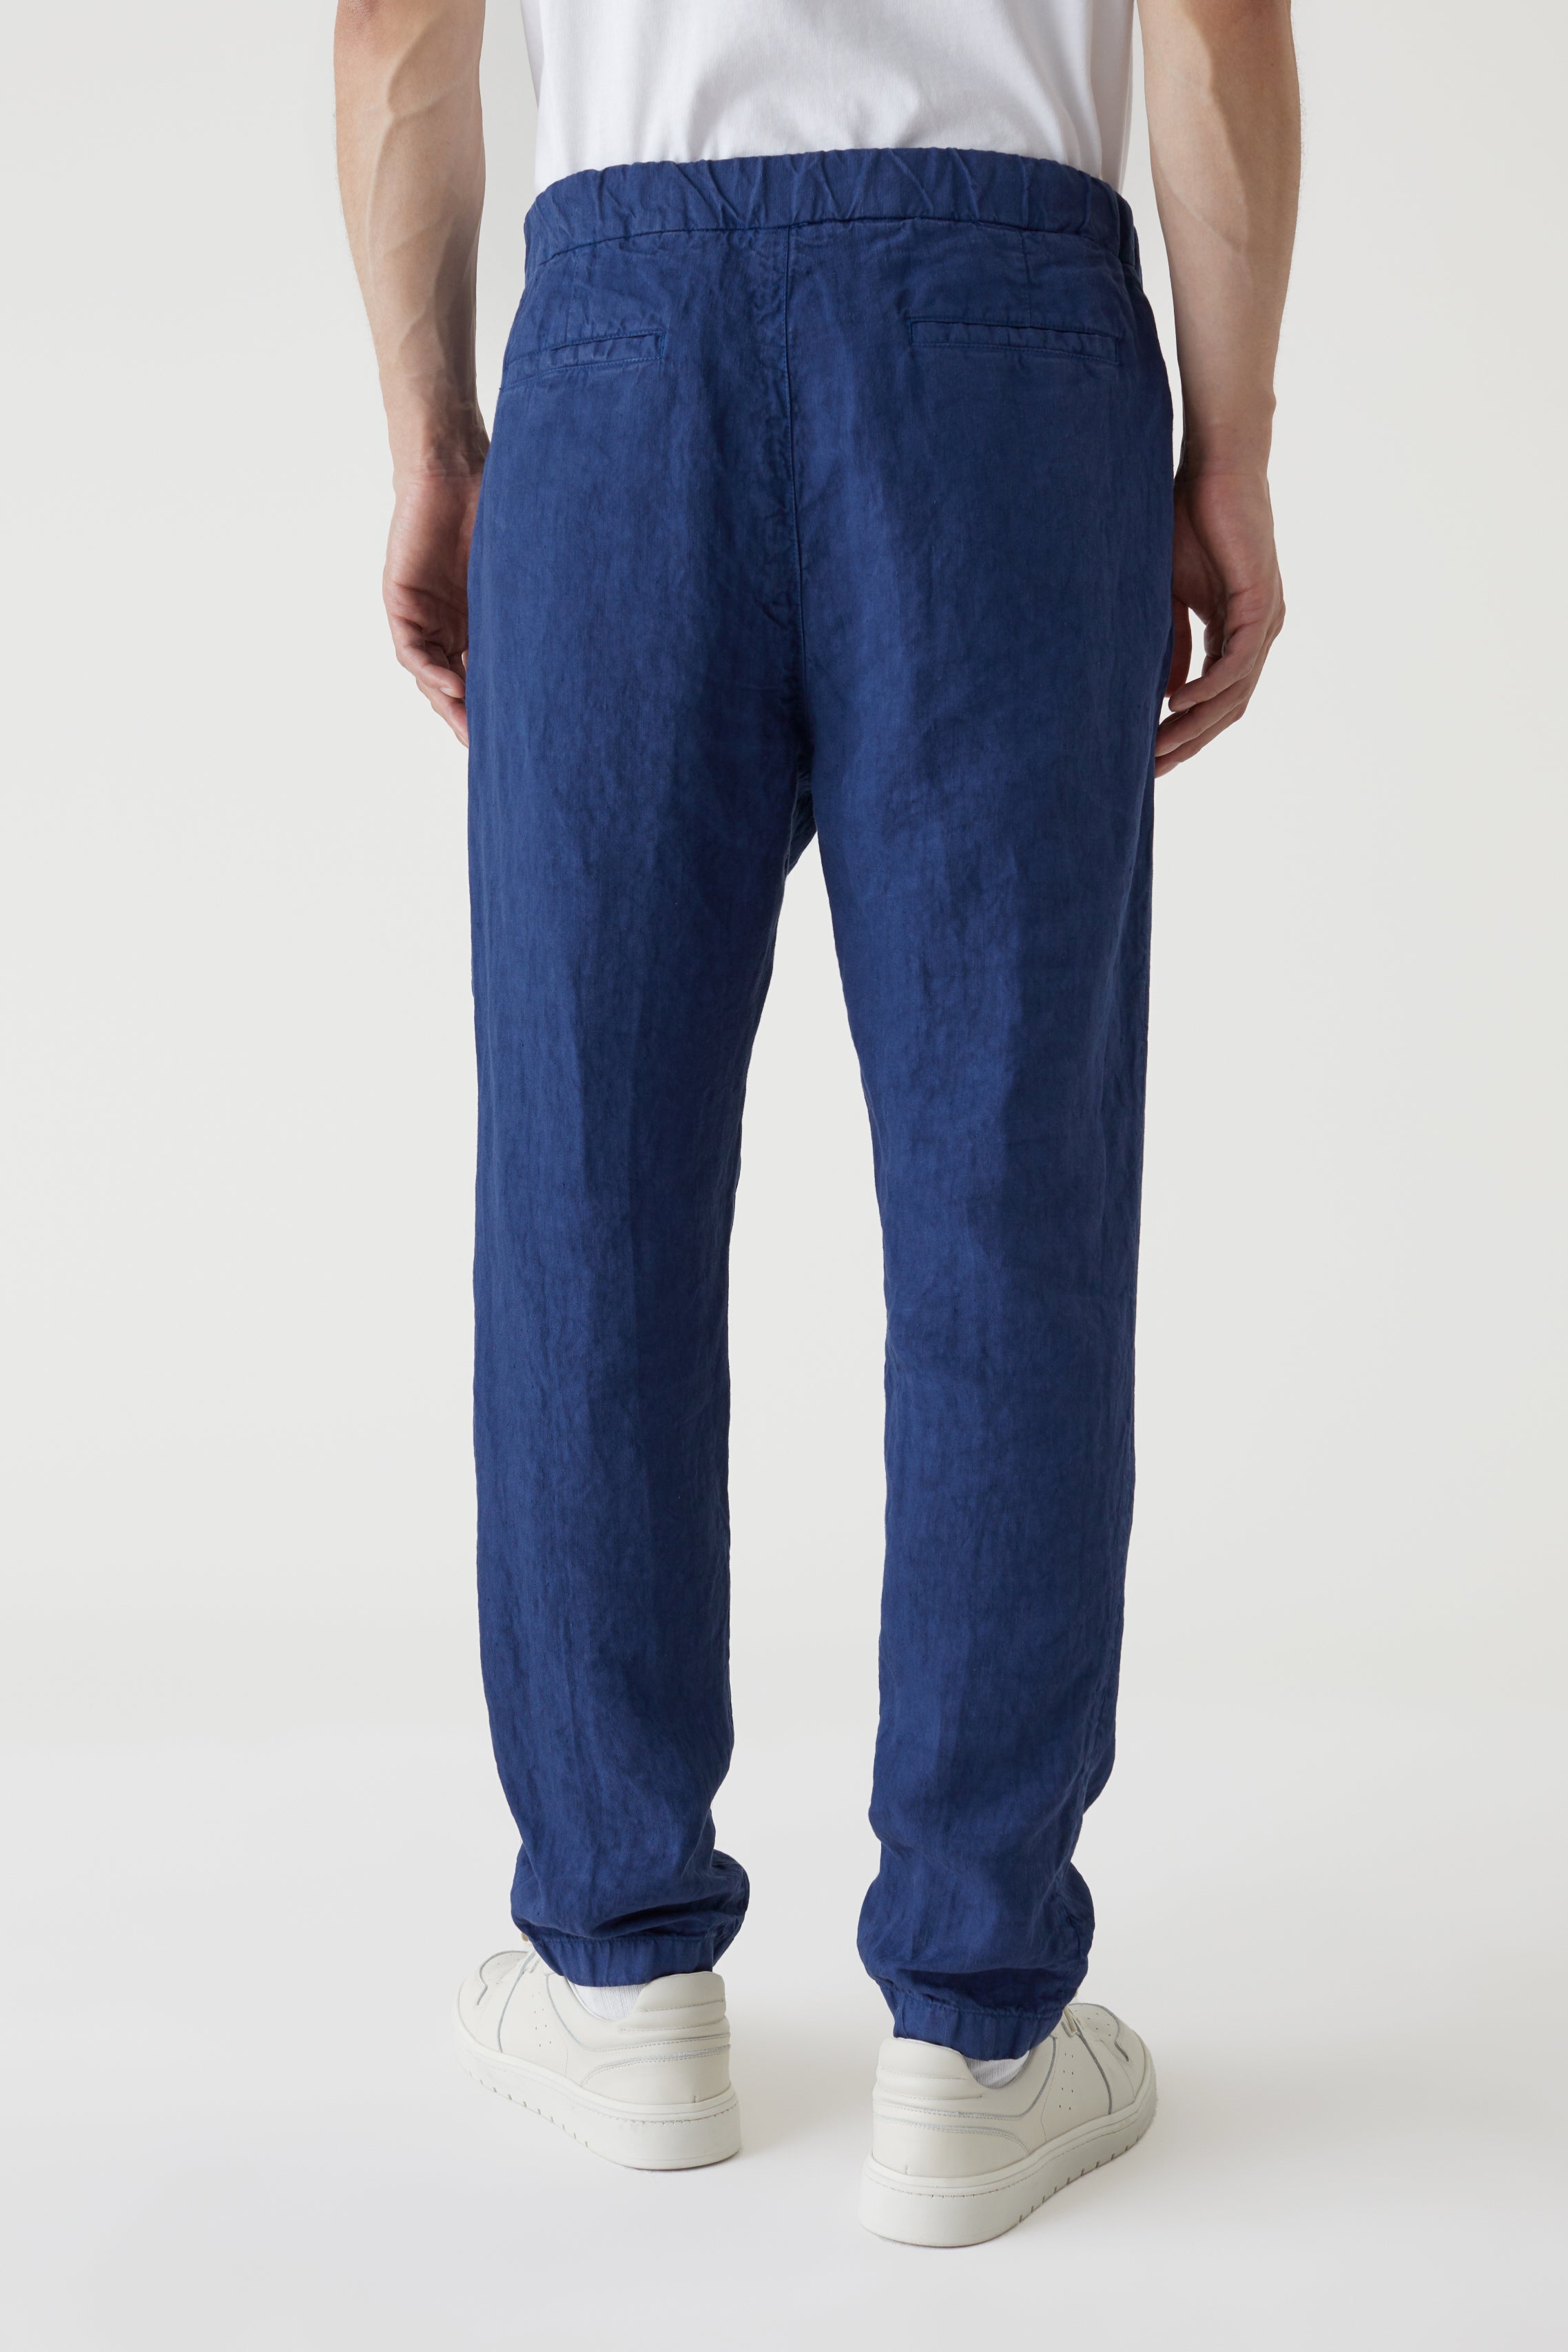 CLOSED-OUTLET-SALE-STYLE-NAME-VIGO-TAPERED-PANTS-Hosen-ARCHIVE-COLLECTION-3.jpg